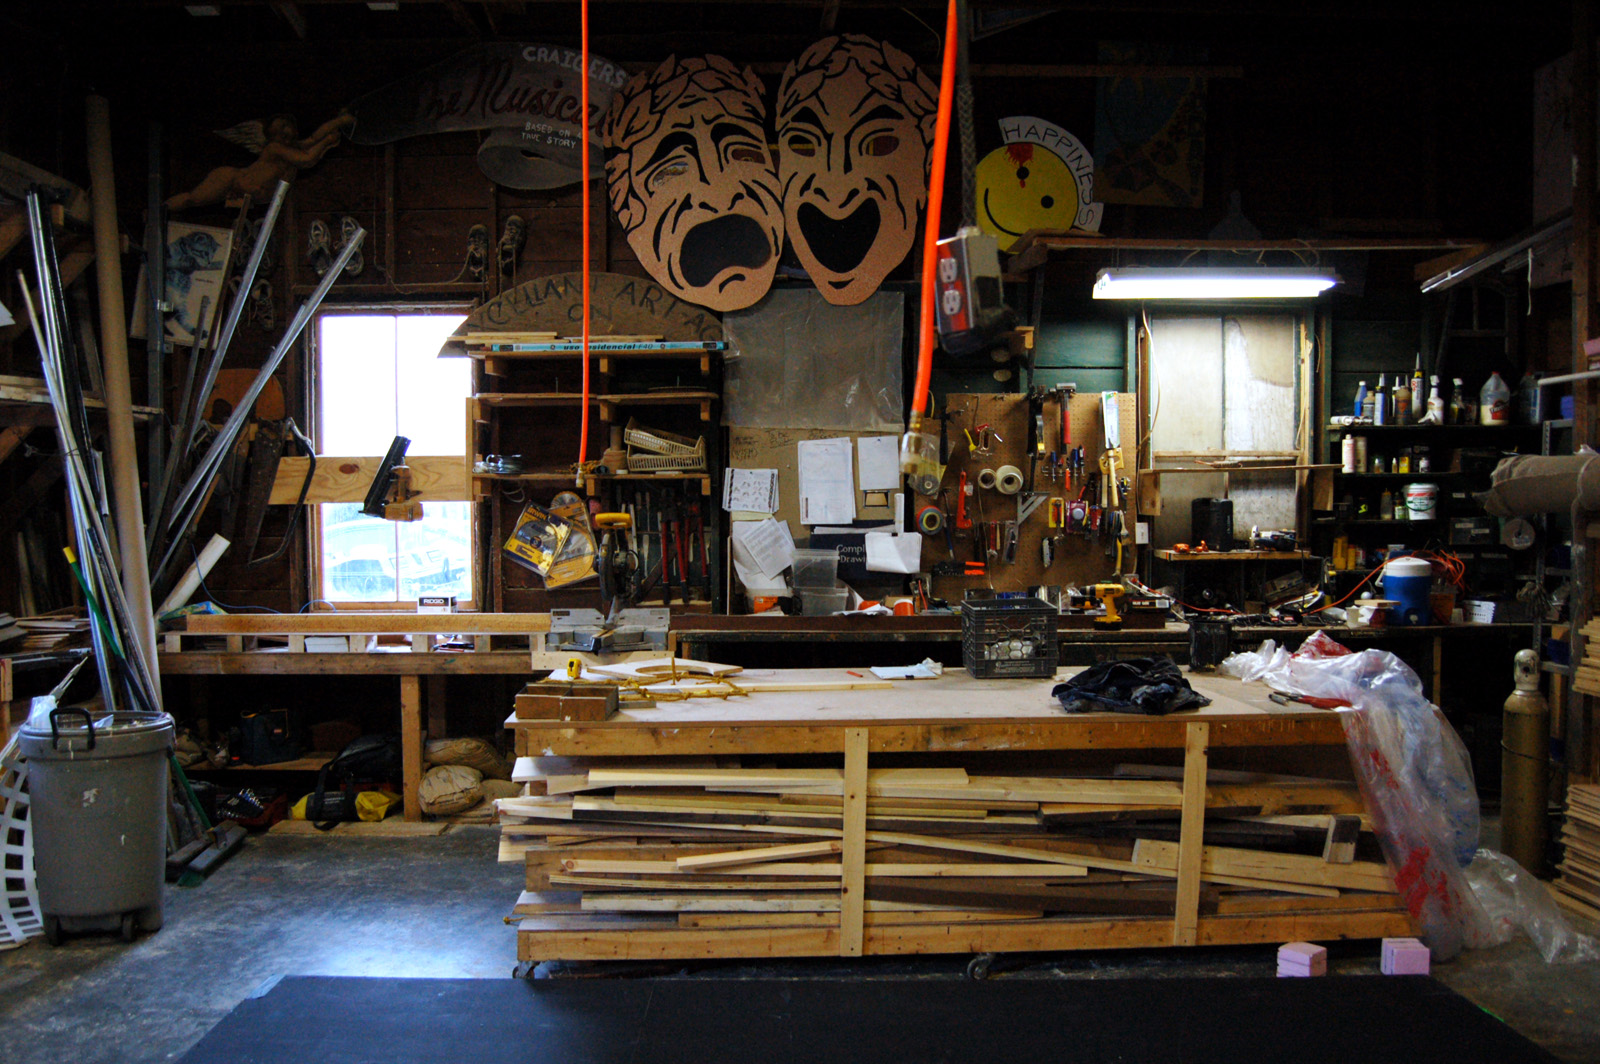 The Prop Building Guidebook: For Theatre, Film, and TV